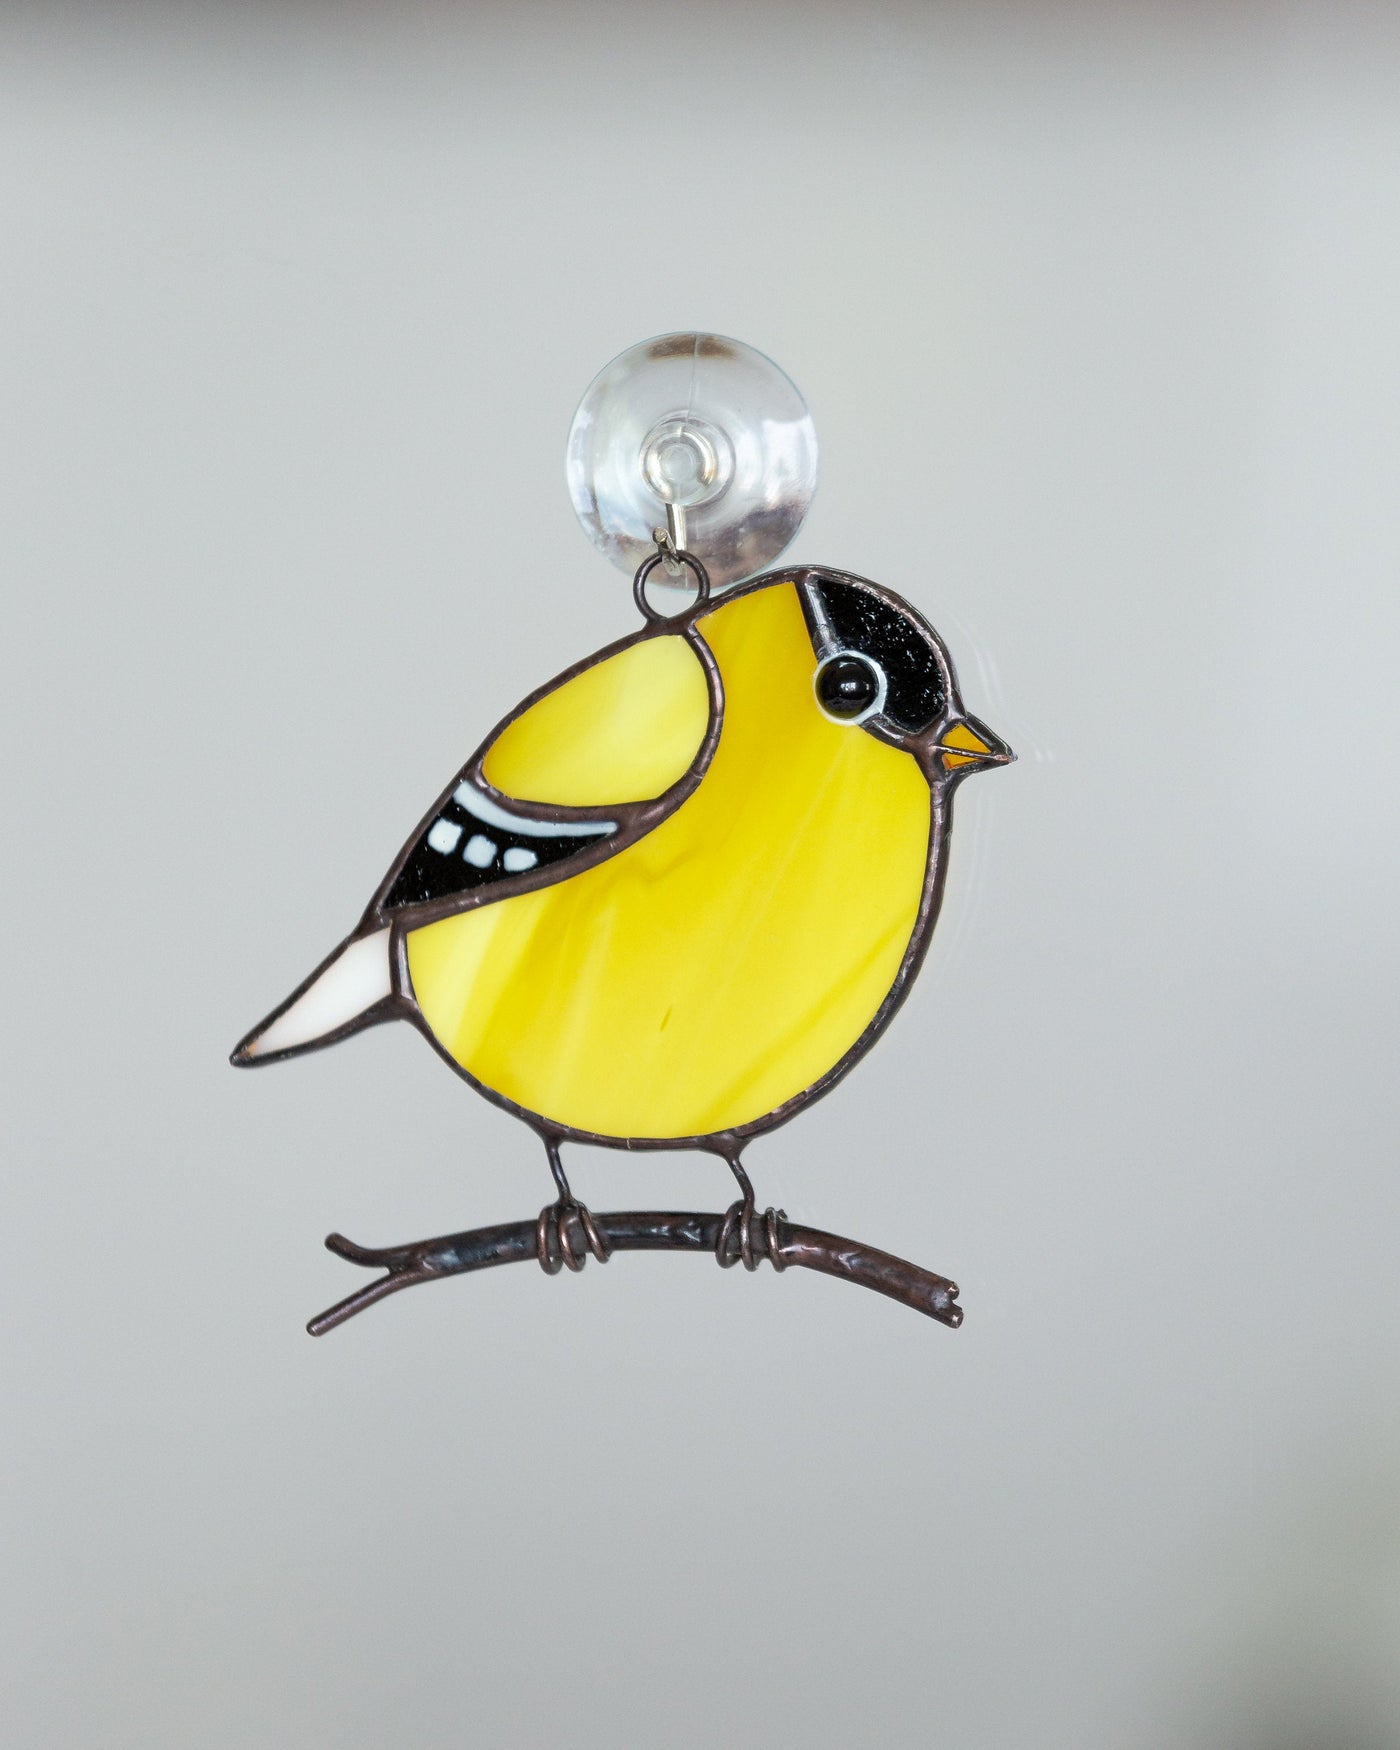 Goldfinch stained glass bird suncatcher mom gift Custom stained glass window hangings fat bird lover gift